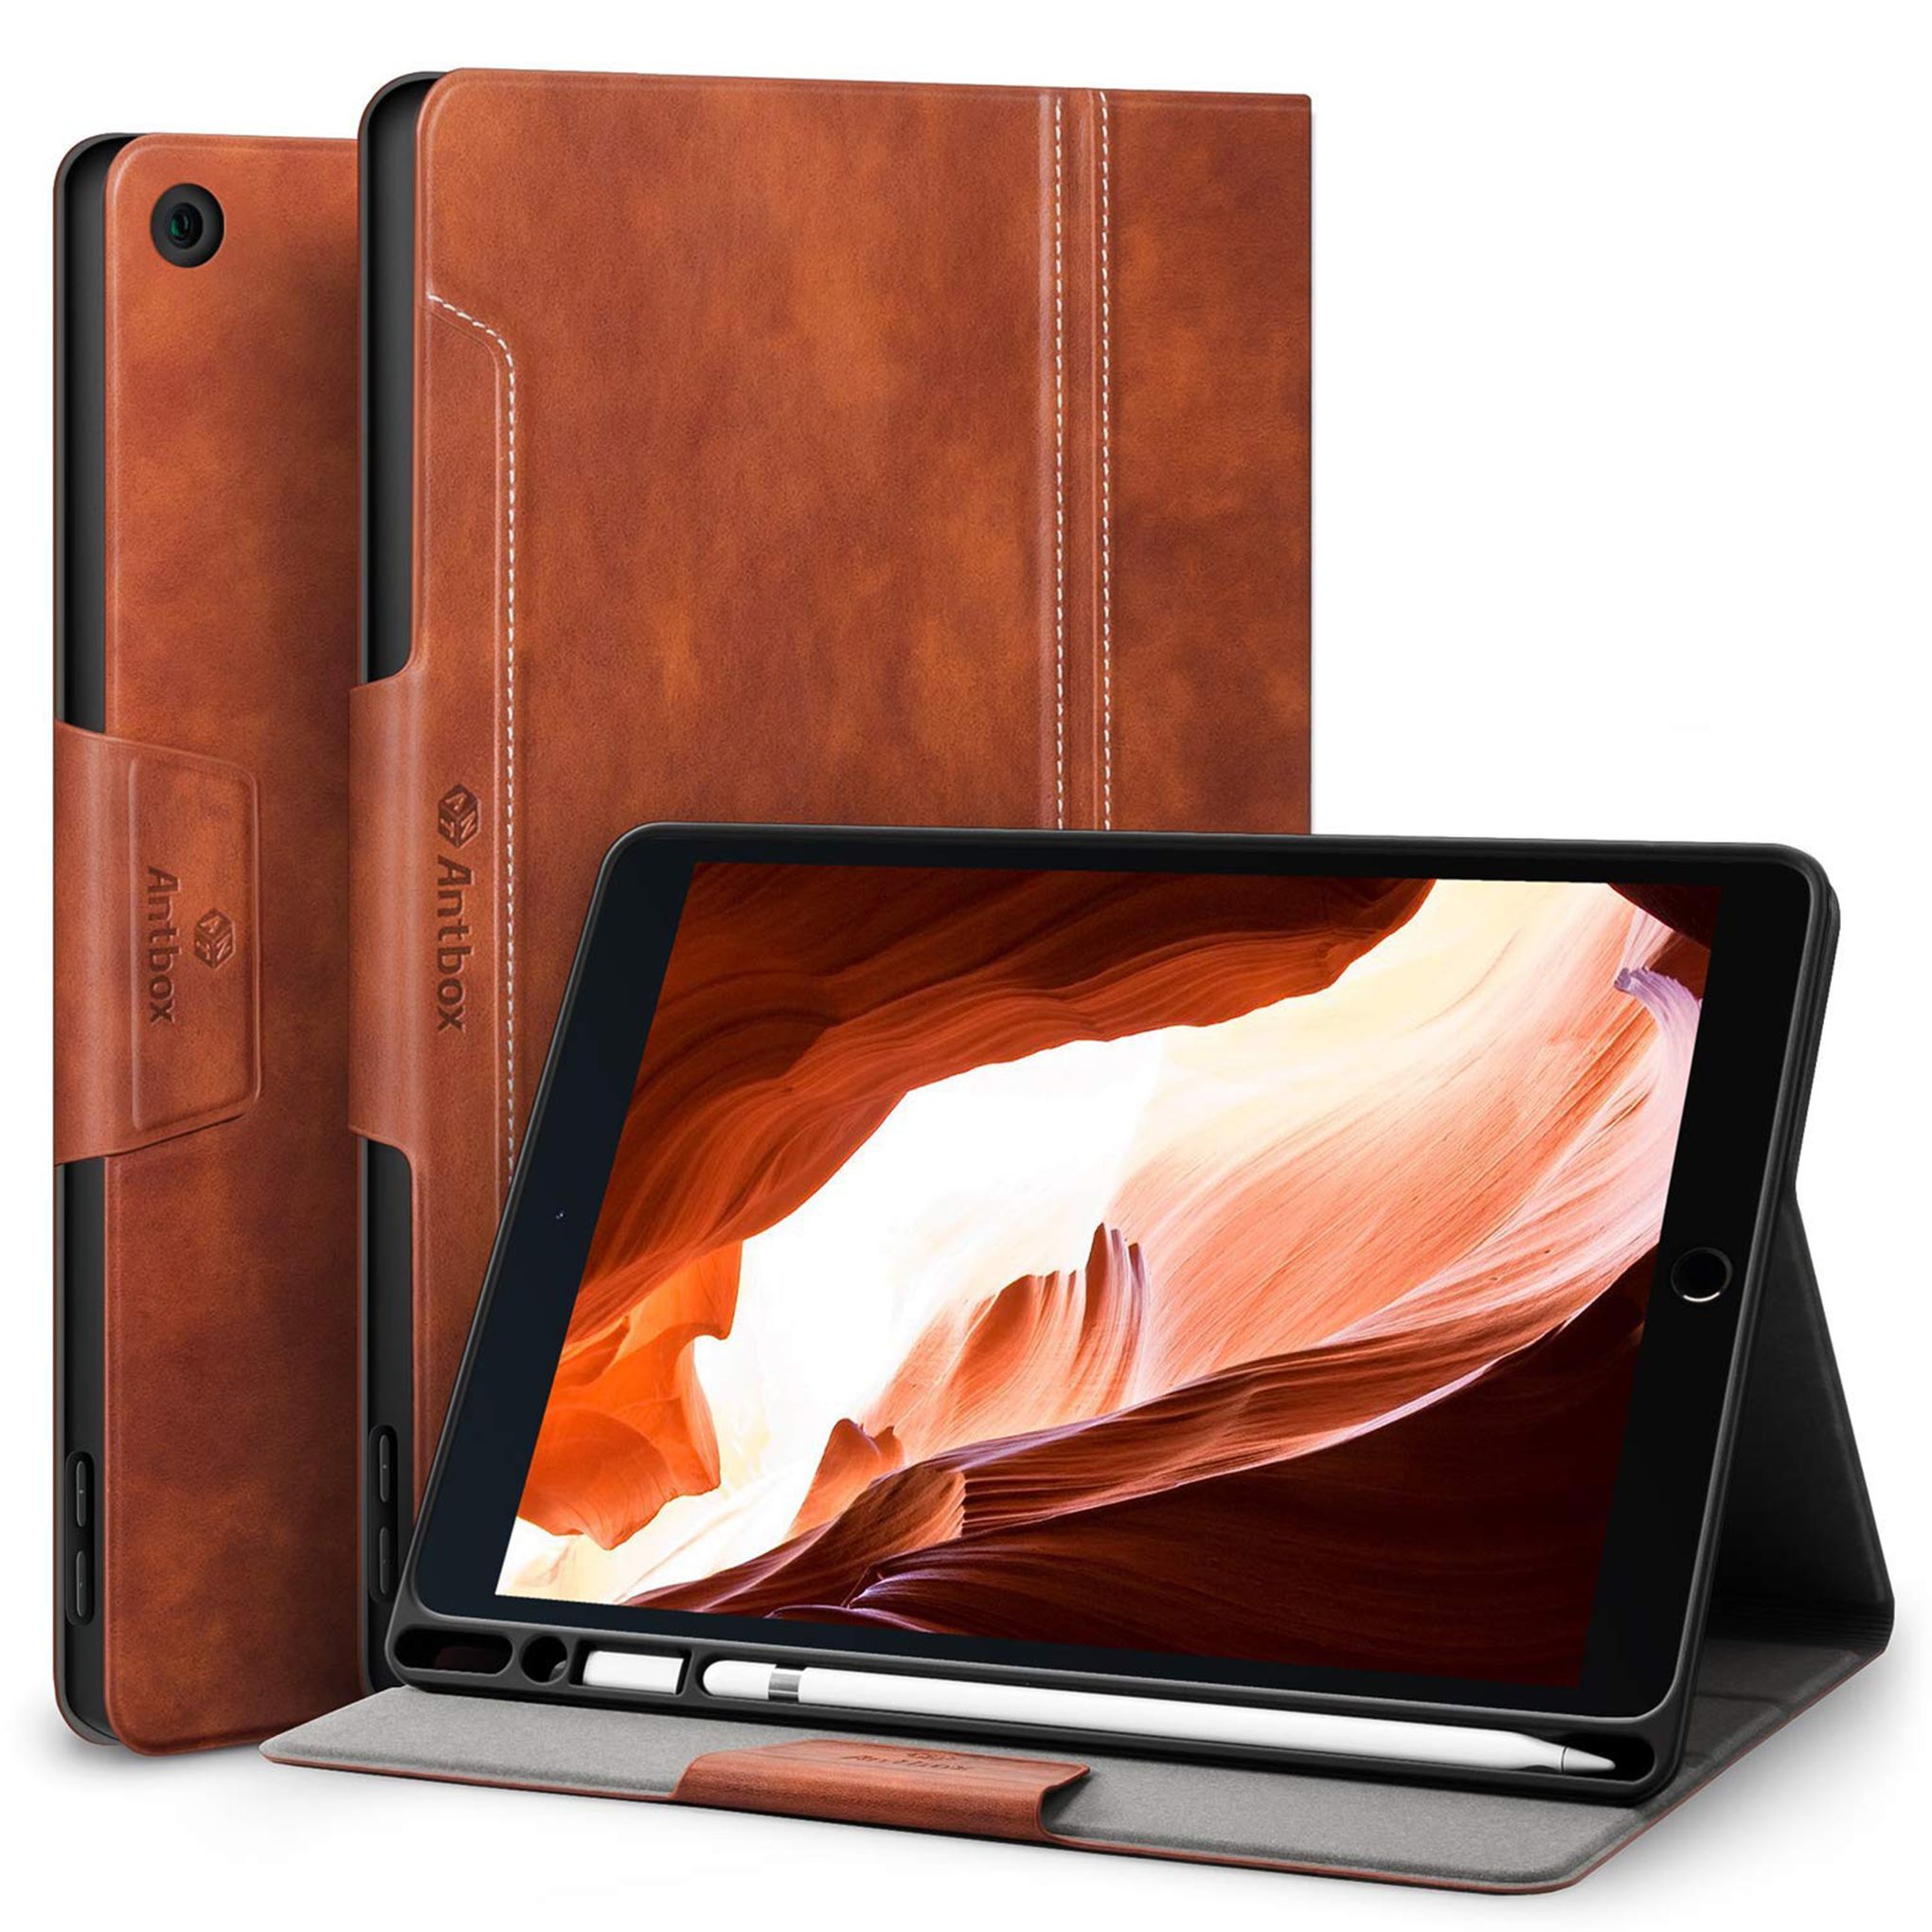 Making the case for the selection of an iPad case